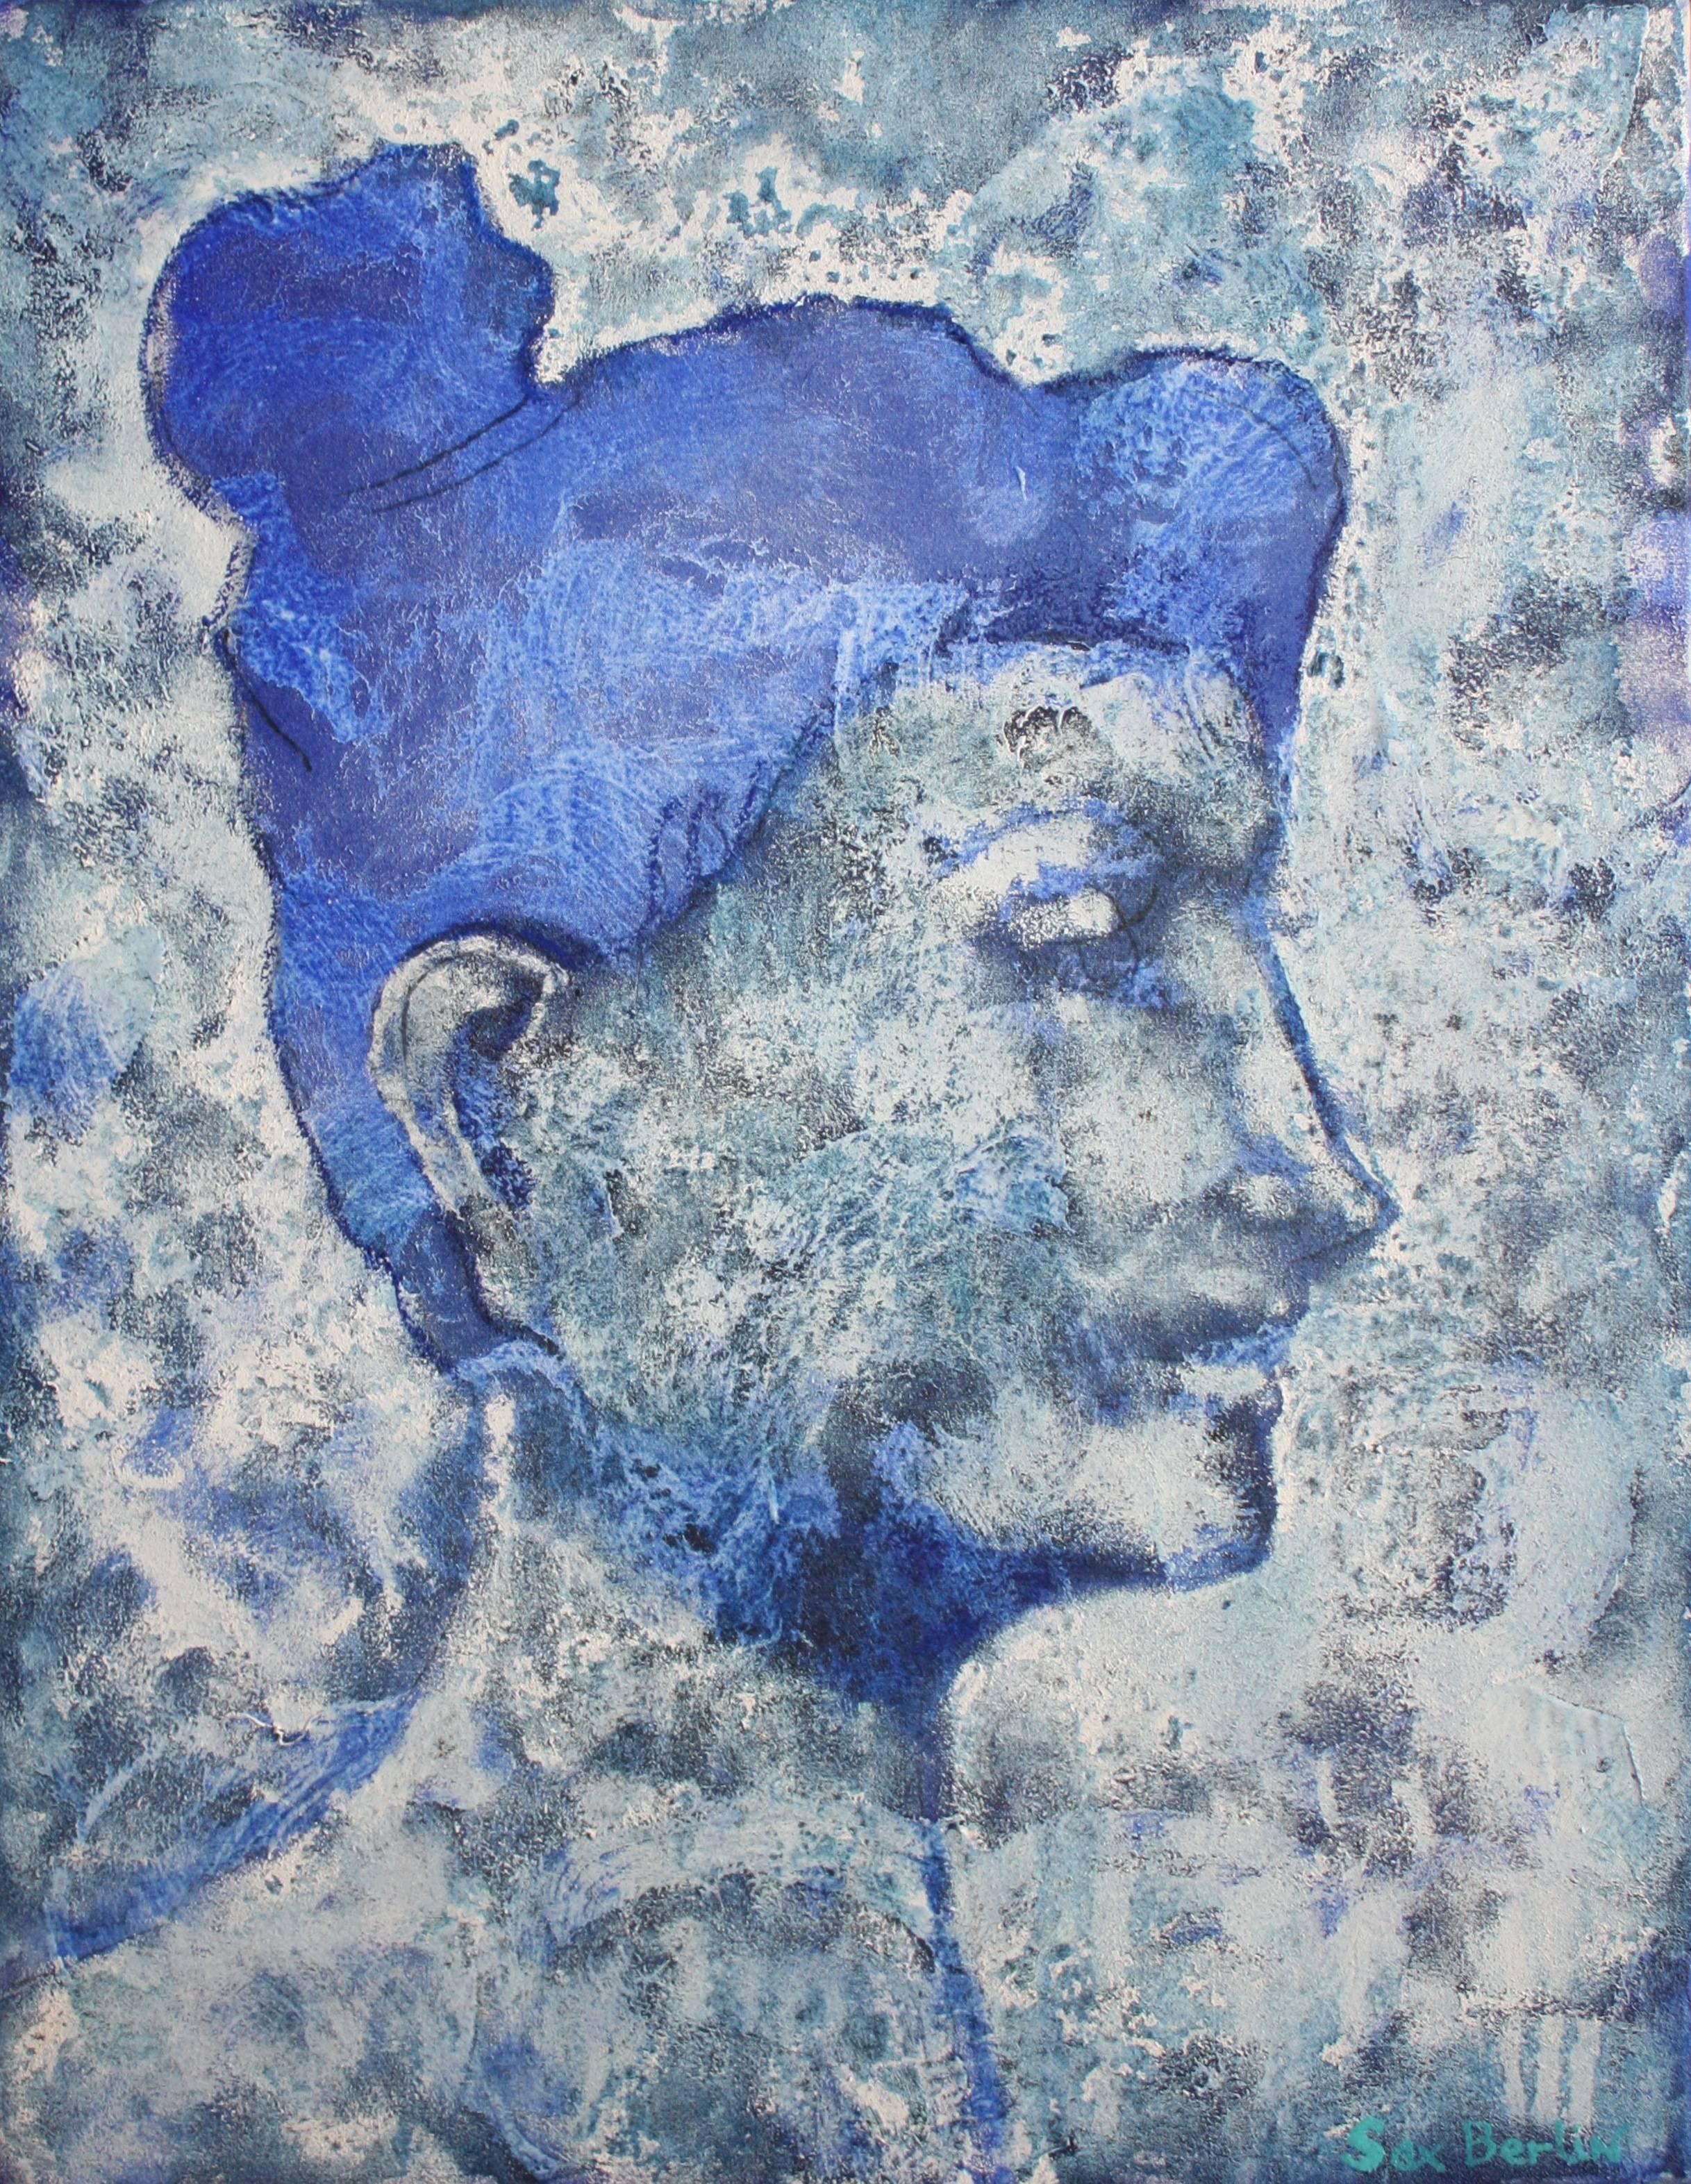 Sax Berlin Figurative Painting - Classic Blue. Contemporary Figurative Oil Painting